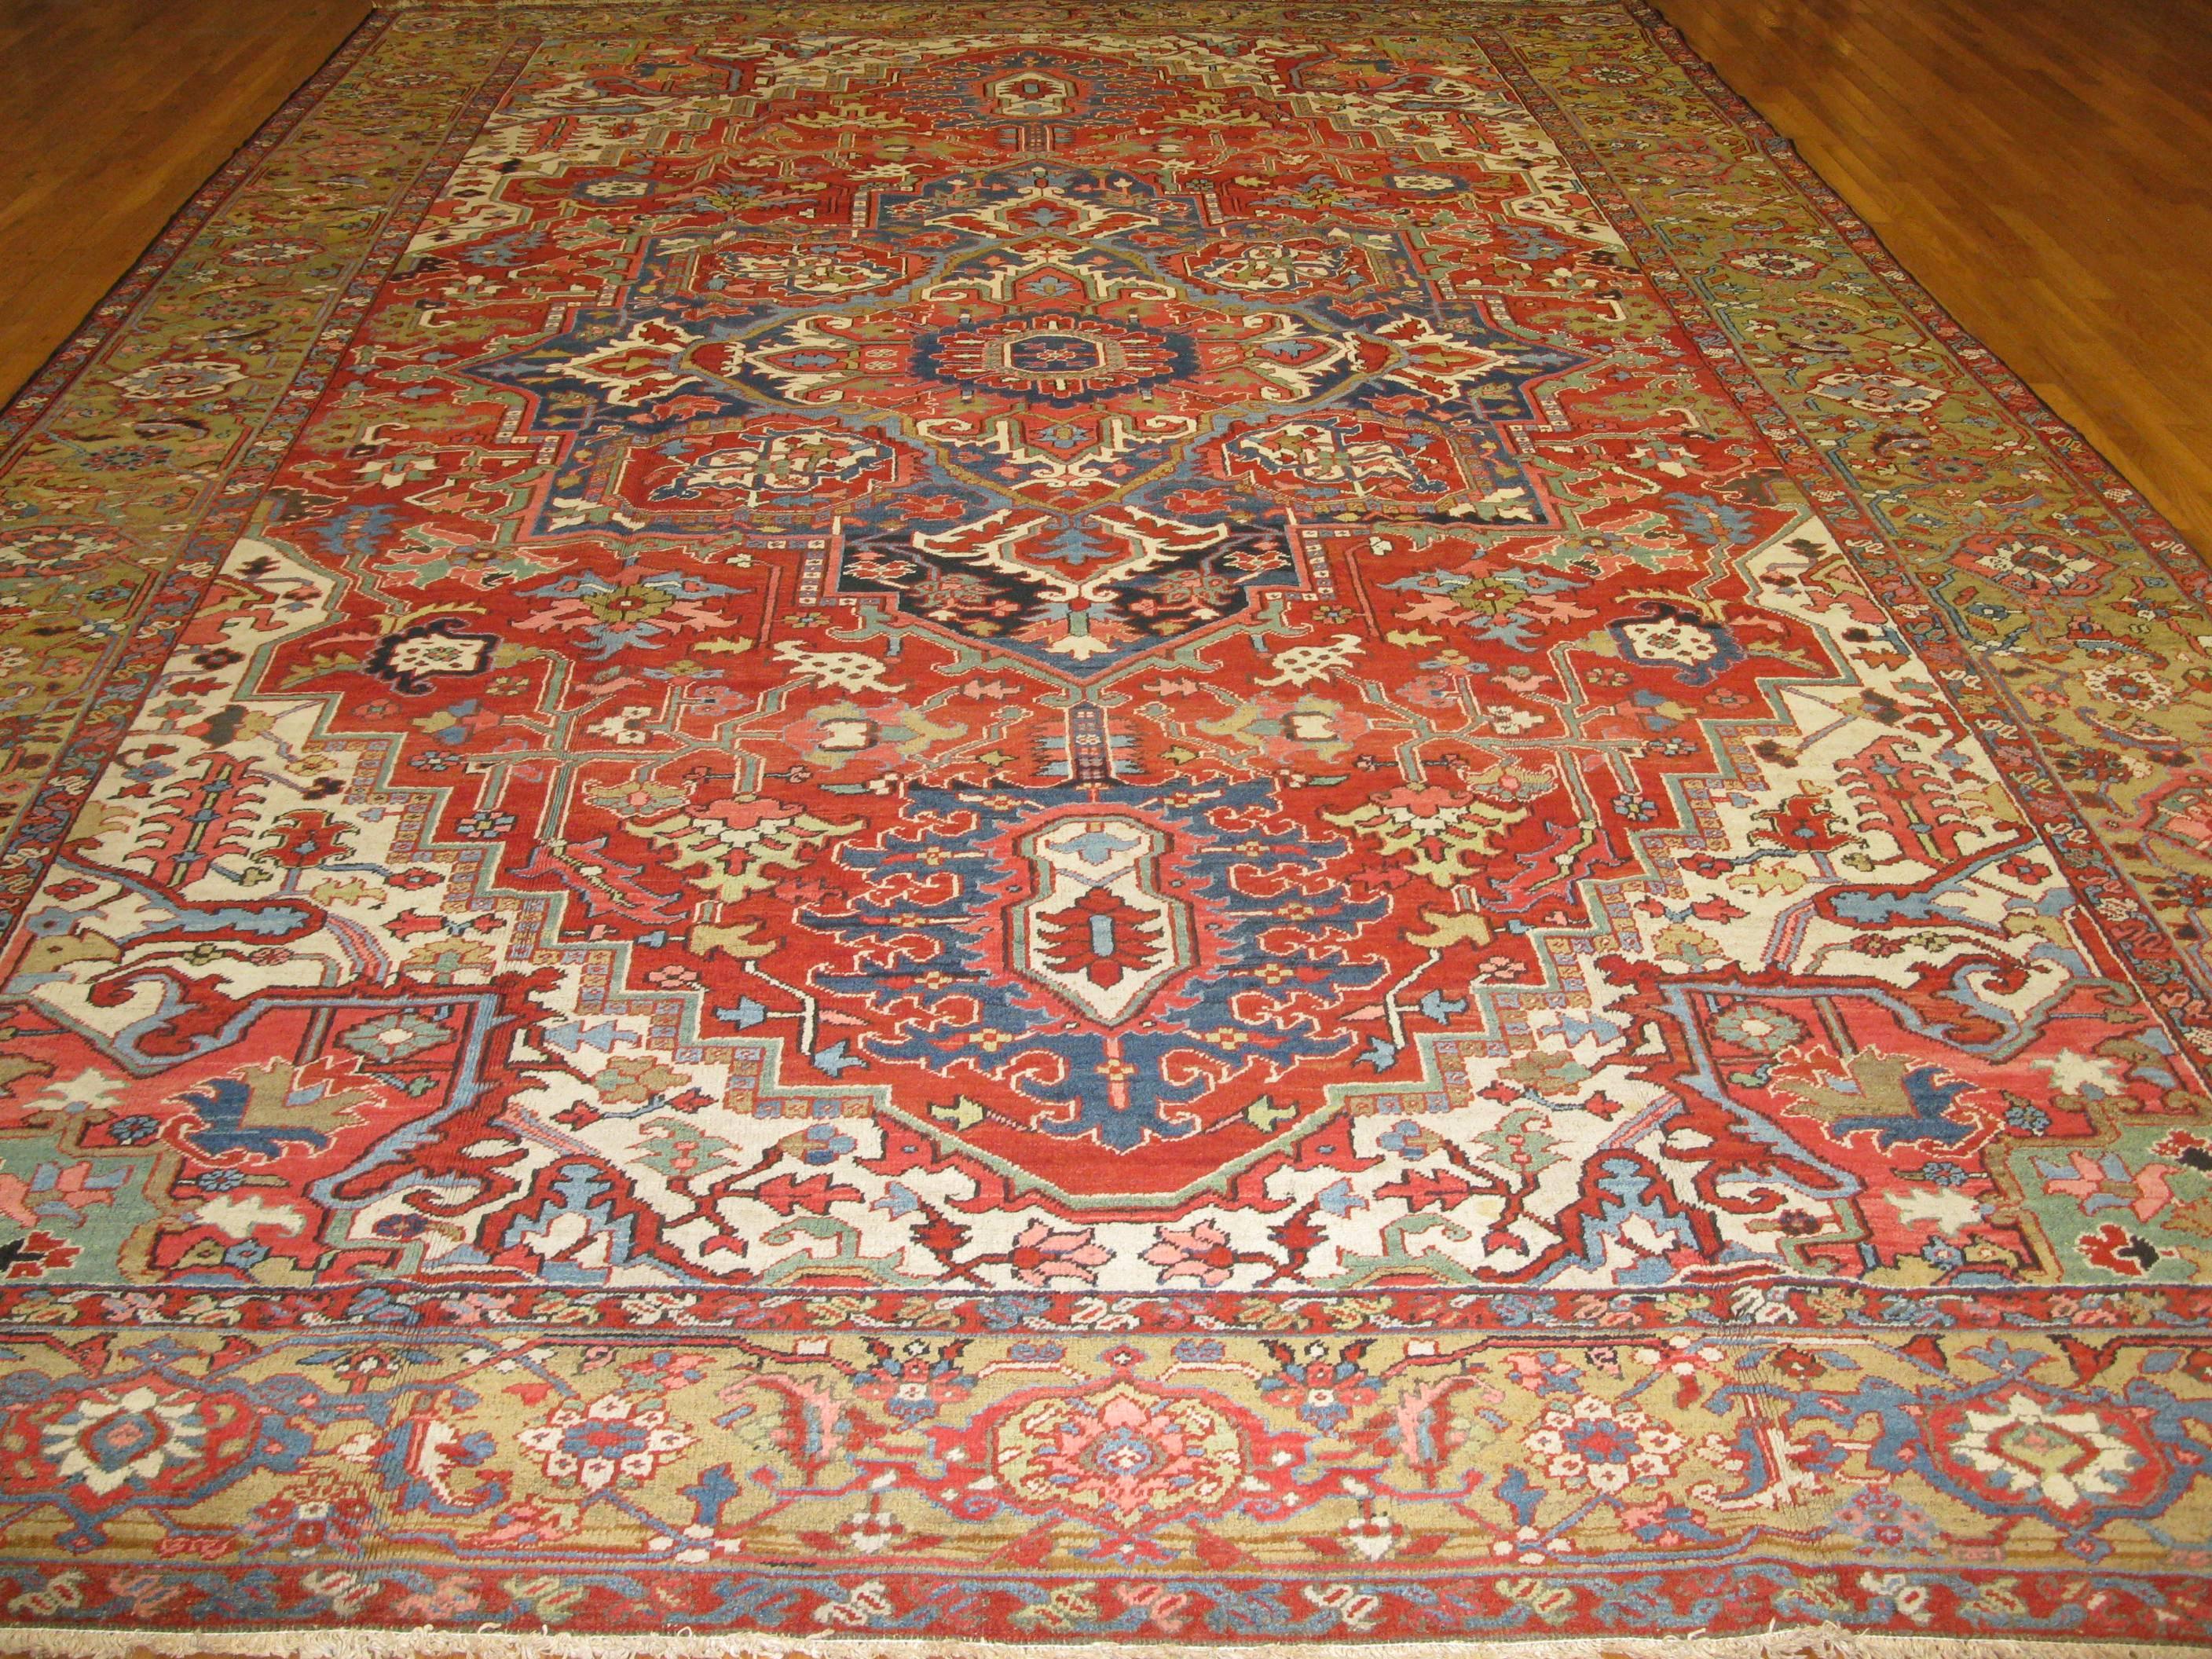 This is an antique hand-knotted rug for the village of Heriz in northwest Iran. The rug has a traditional geometric design made with wool pile, cotton foundation and all vegetable dyes. It measures 11' x 16' 6'' and is in great condition.